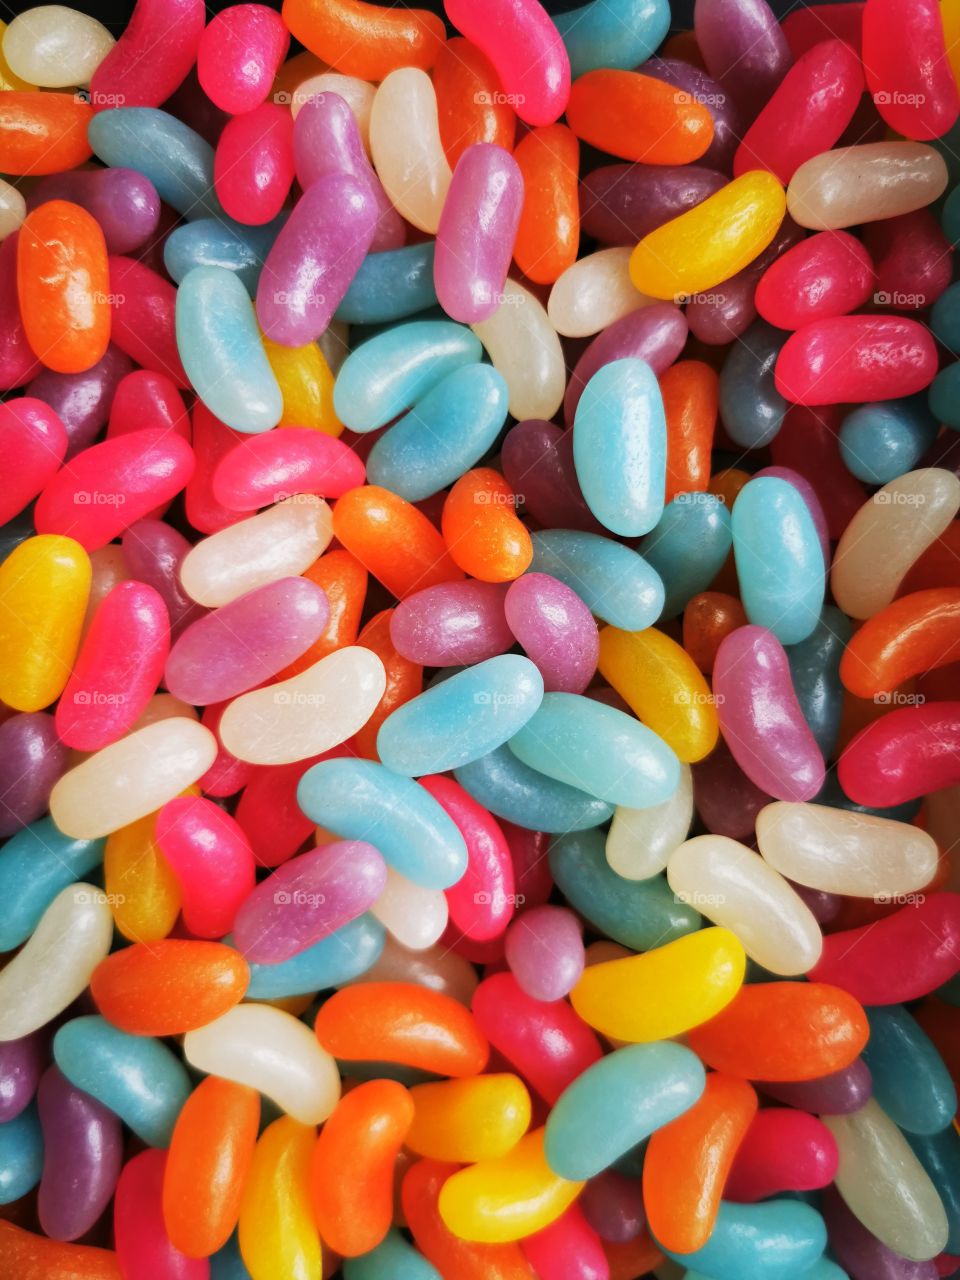 Colourful sugary jelly bean sweets in a pile.